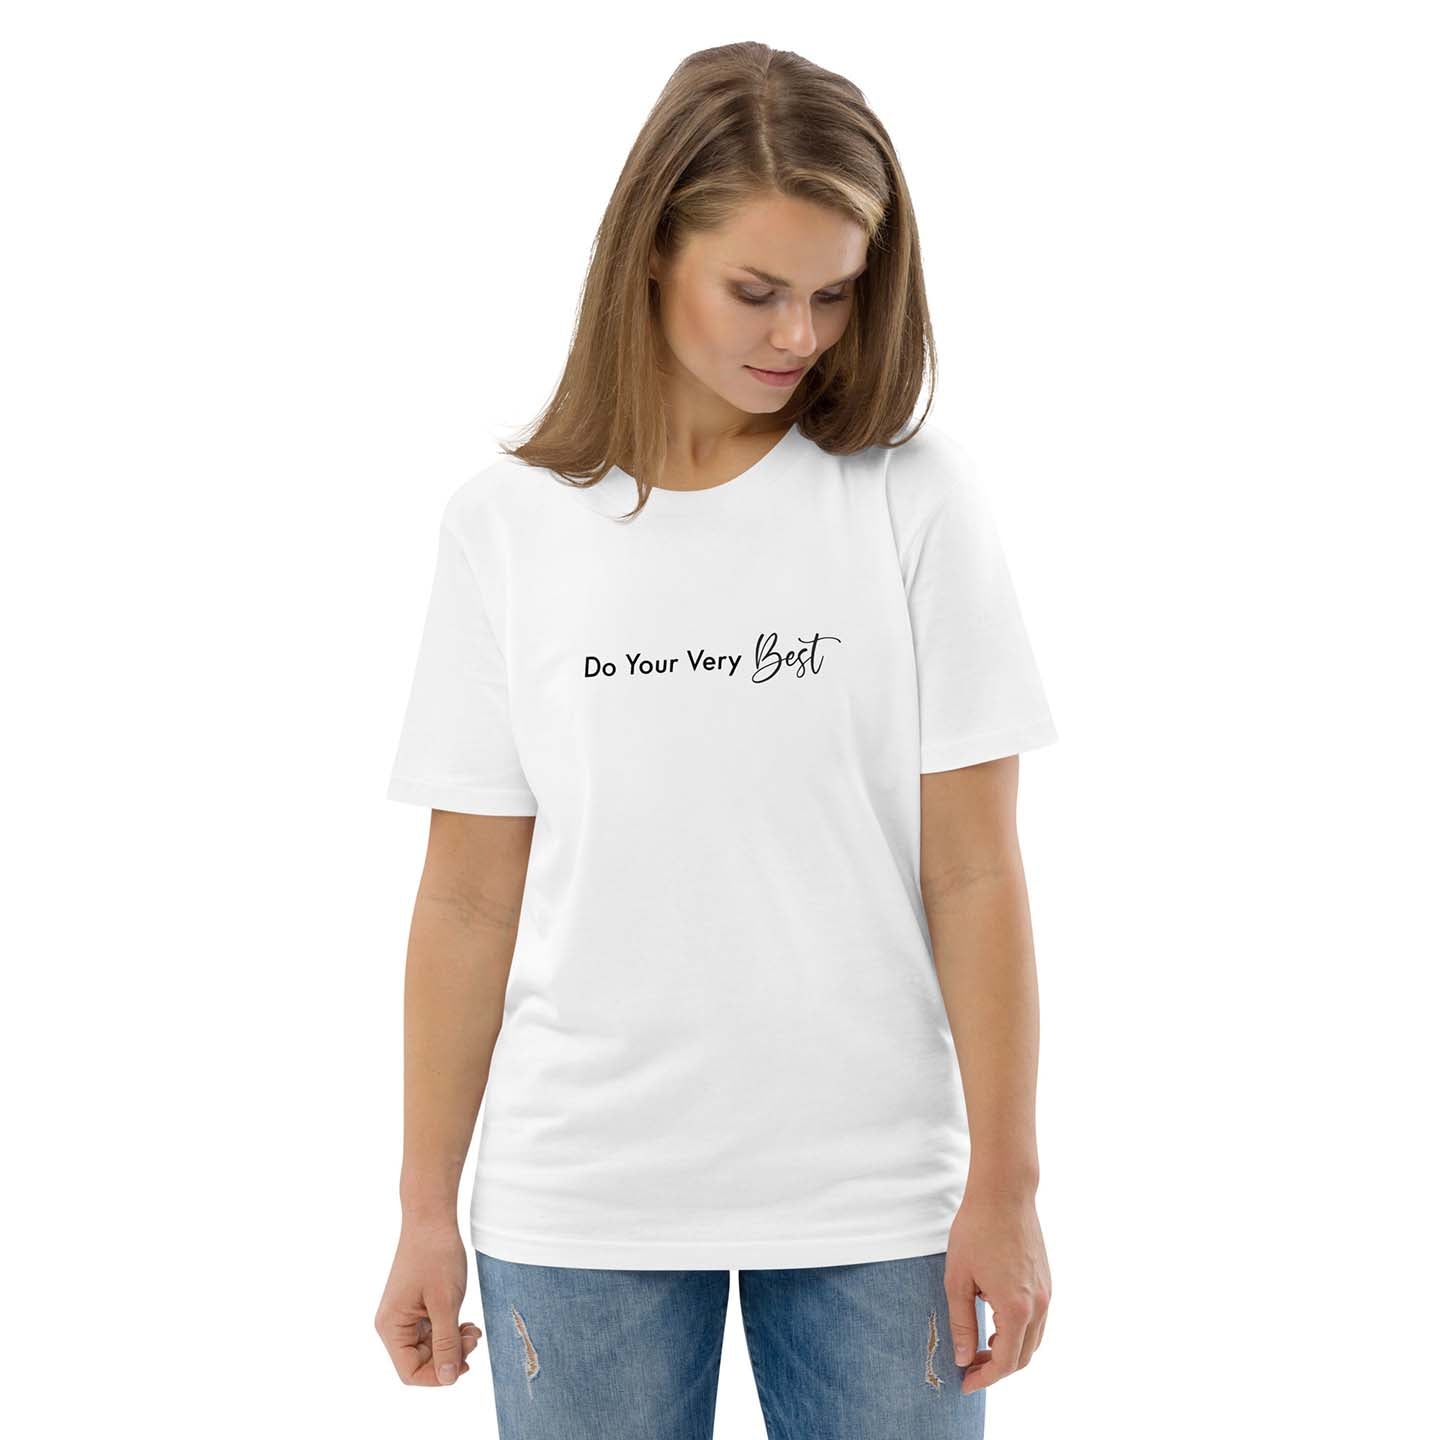 Women white 100% organic cotton t-shirt with motivational quote, "Do Your Very Best."